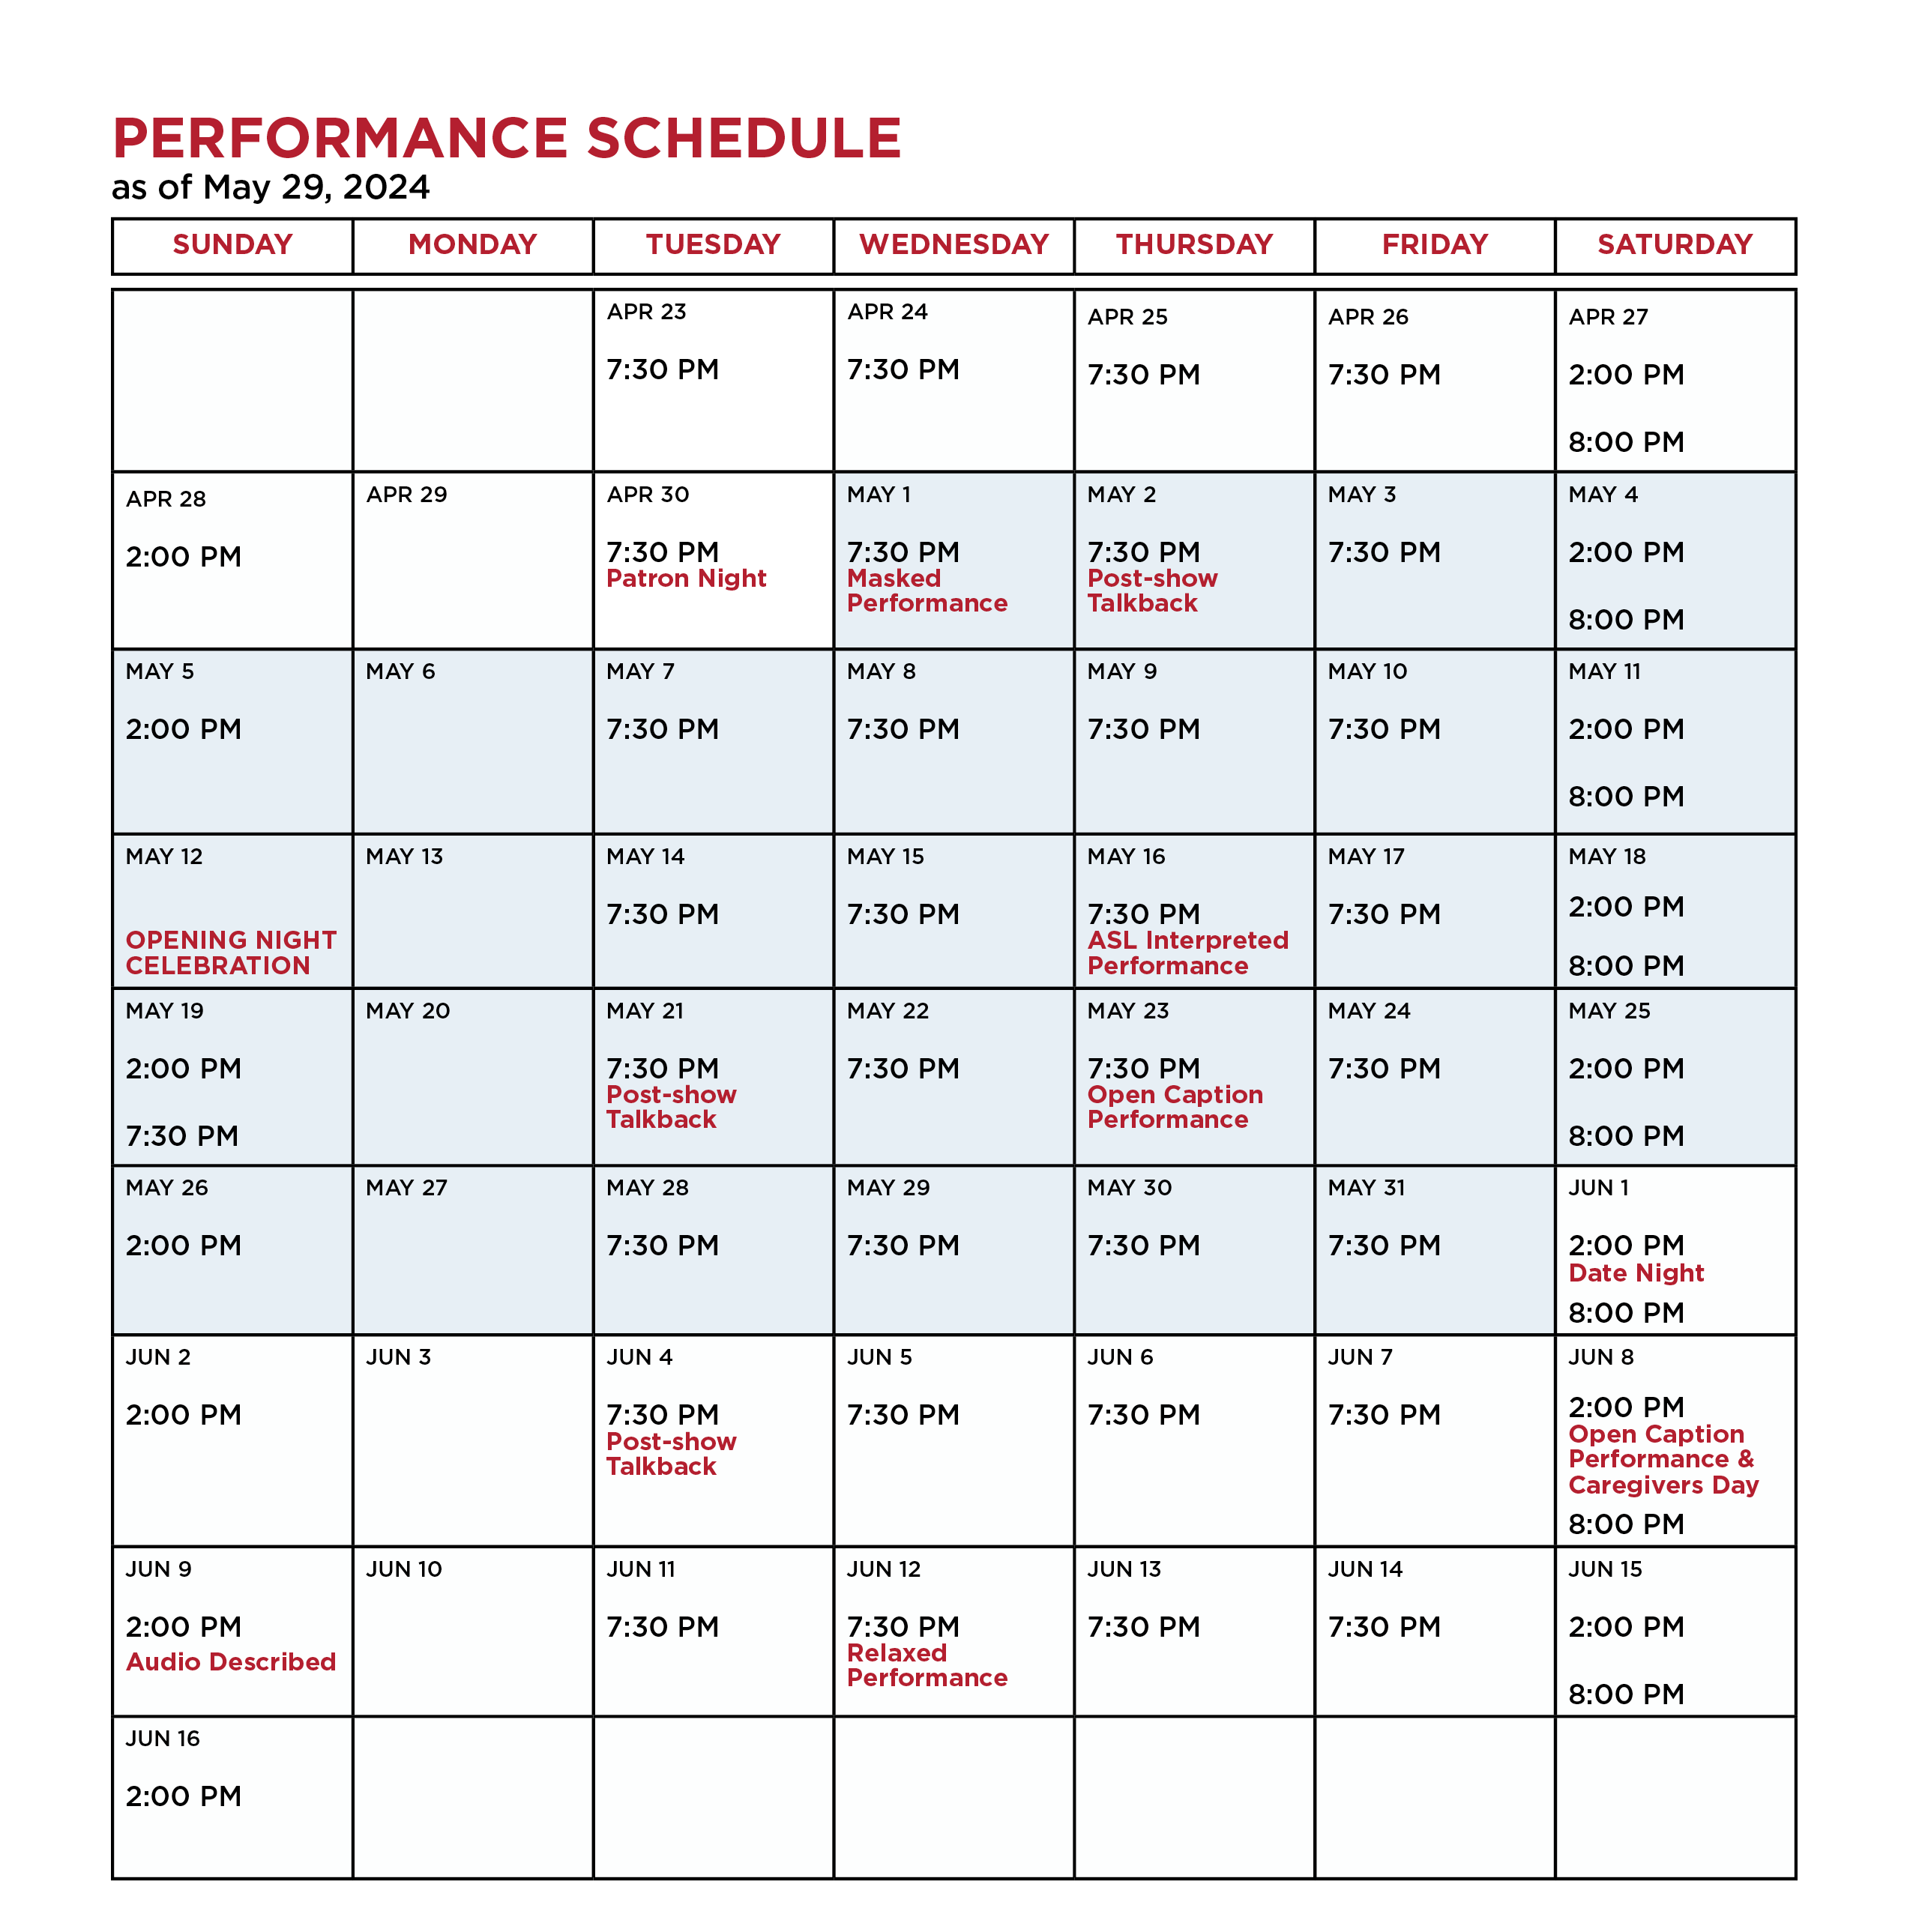 All of Me Performance Schedule as of 5/29/24. To View up to date show times, click BUY TICKETS